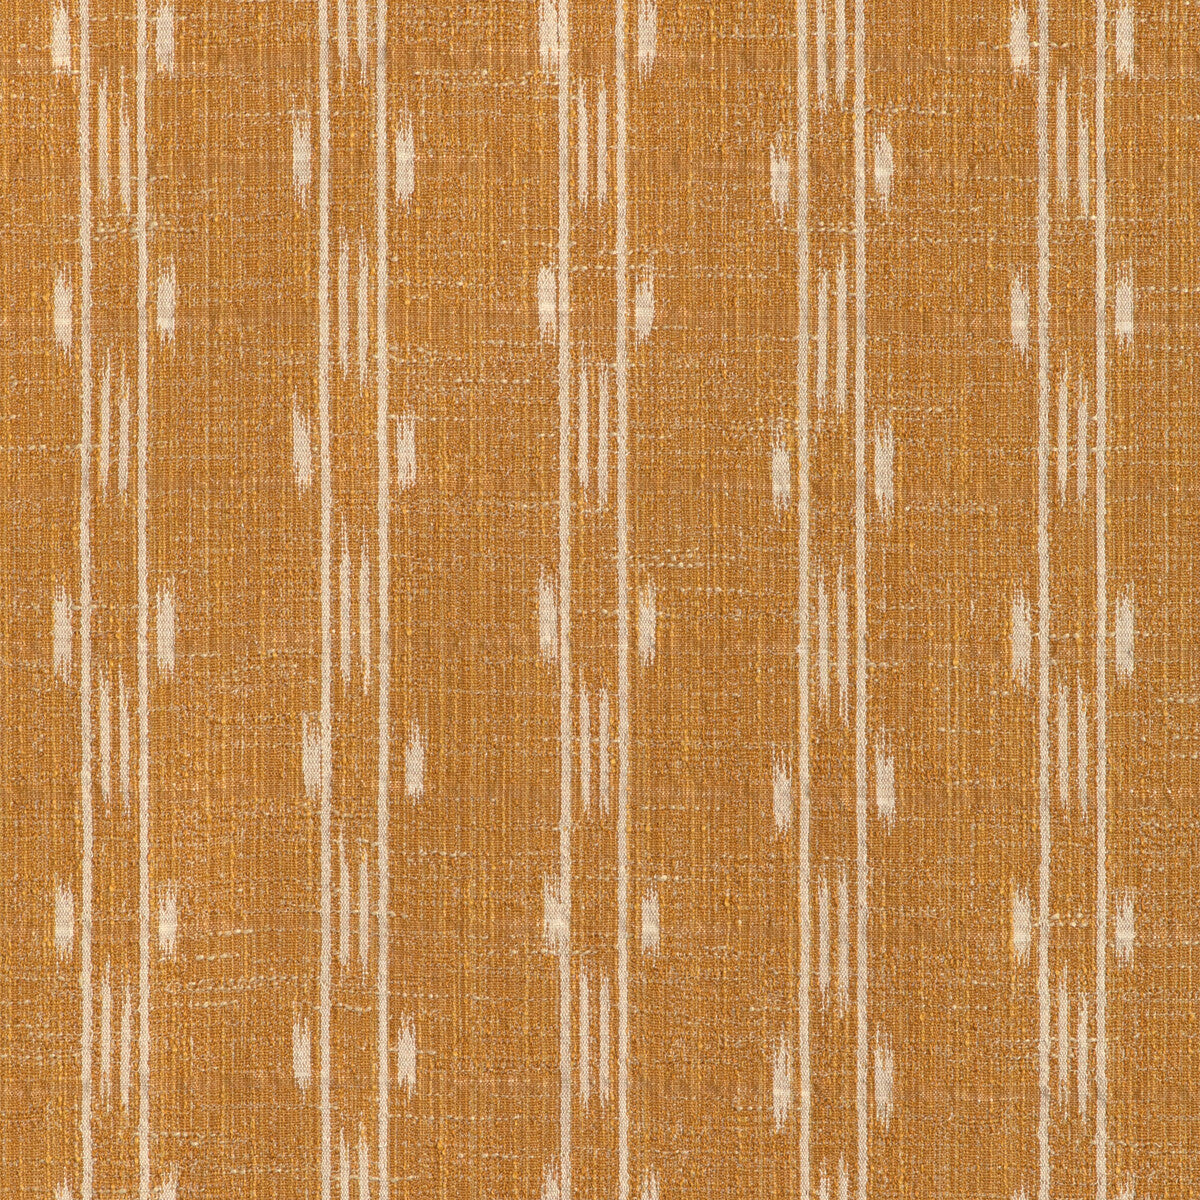 Le Spritz Weave fabric in ochre color - pattern 8024119.4.0 - by Brunschwig &amp; Fils in the Les Ensembliers L&